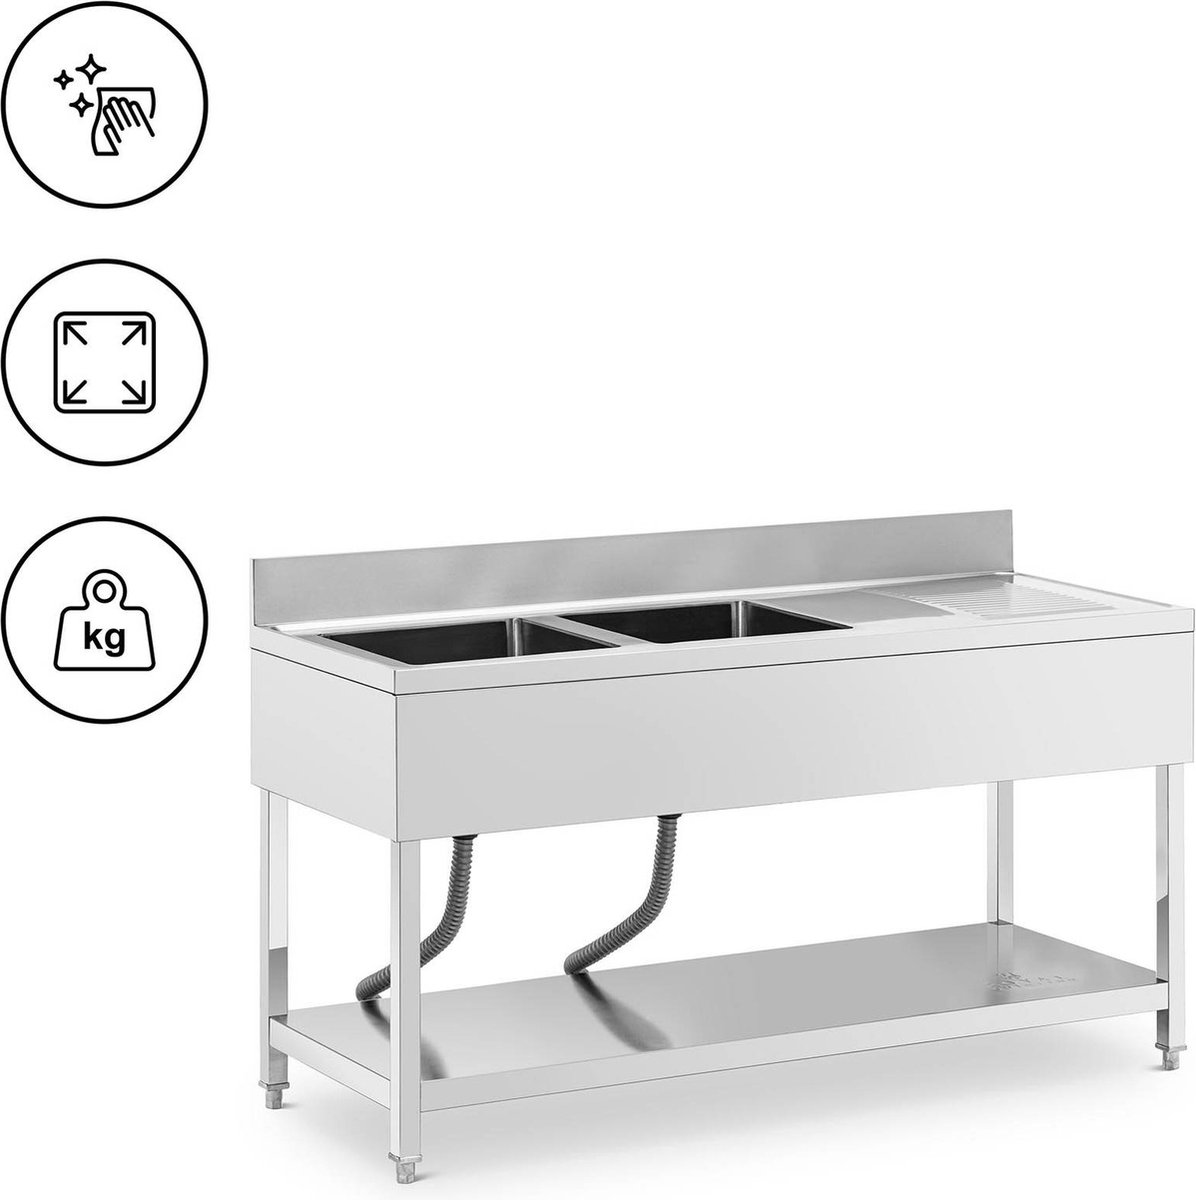 Royal Catering Rinse Table - 2 BELVIS - roestvrij staal - 160 x 60 x 97 cm - Royal Catering